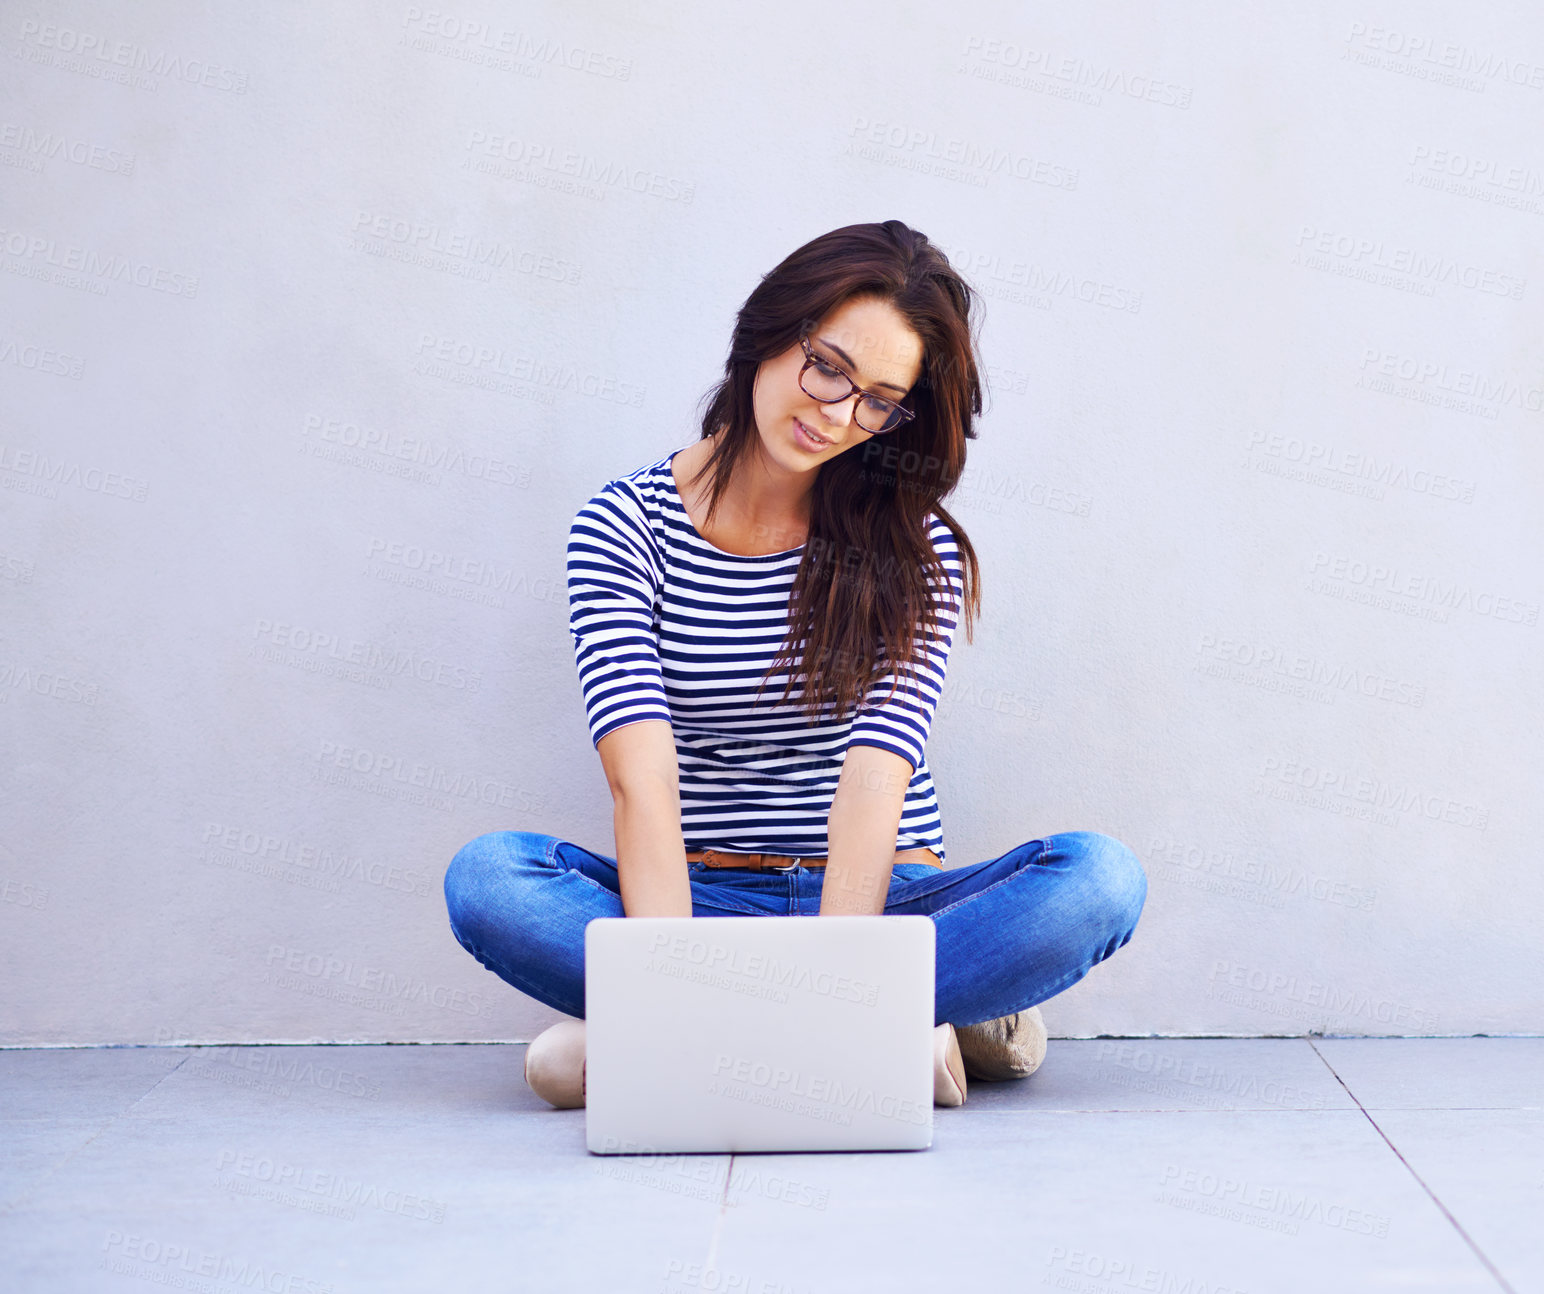 Buy stock photo Full length shot of an attractive young woman sitting cross legged using a laptop